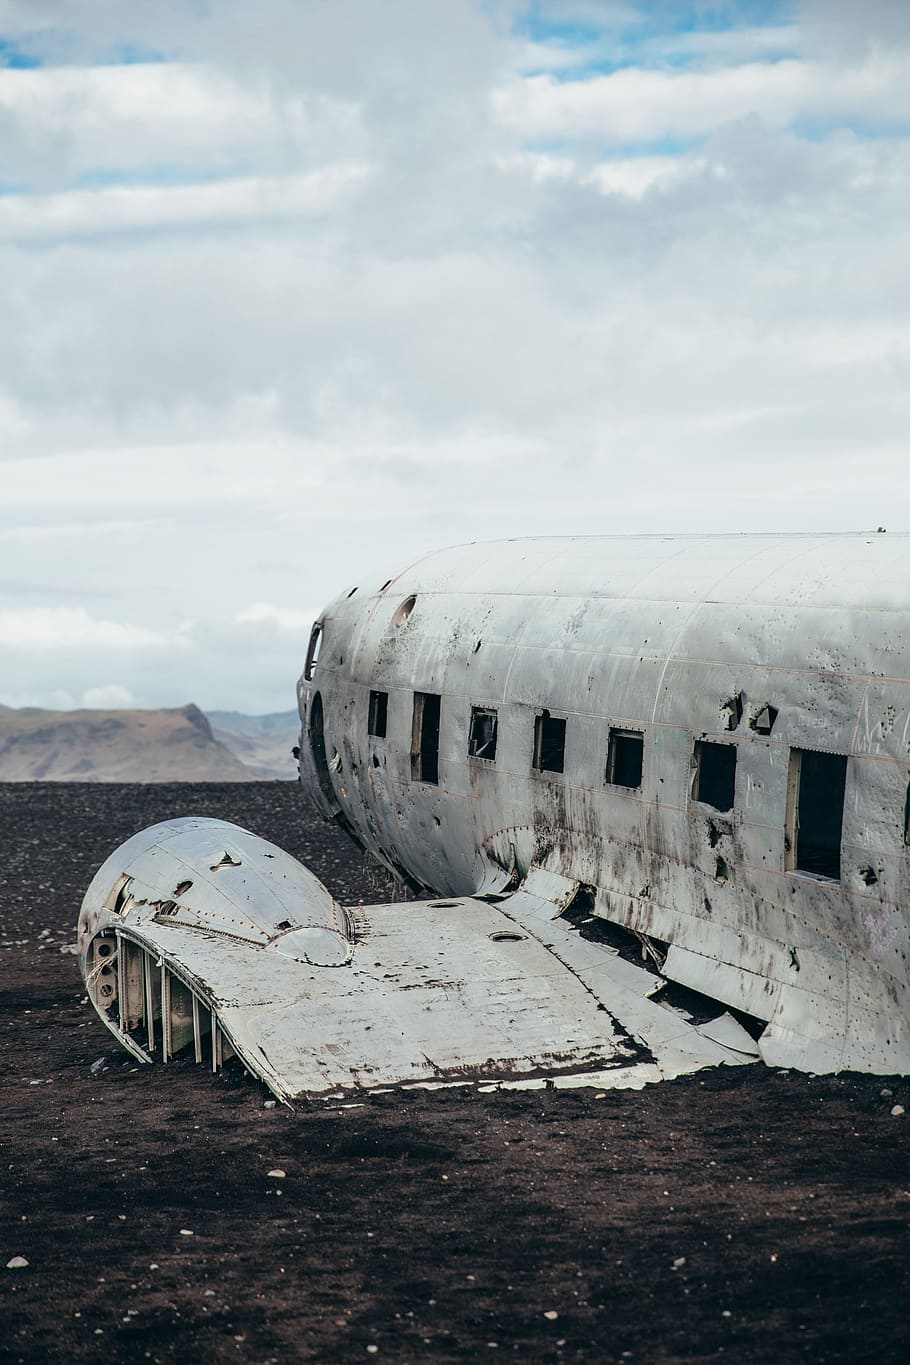 crashed, aircraft wreckage, field, airplane, cockpit, crushed, damage, desert, mountain, outdoors